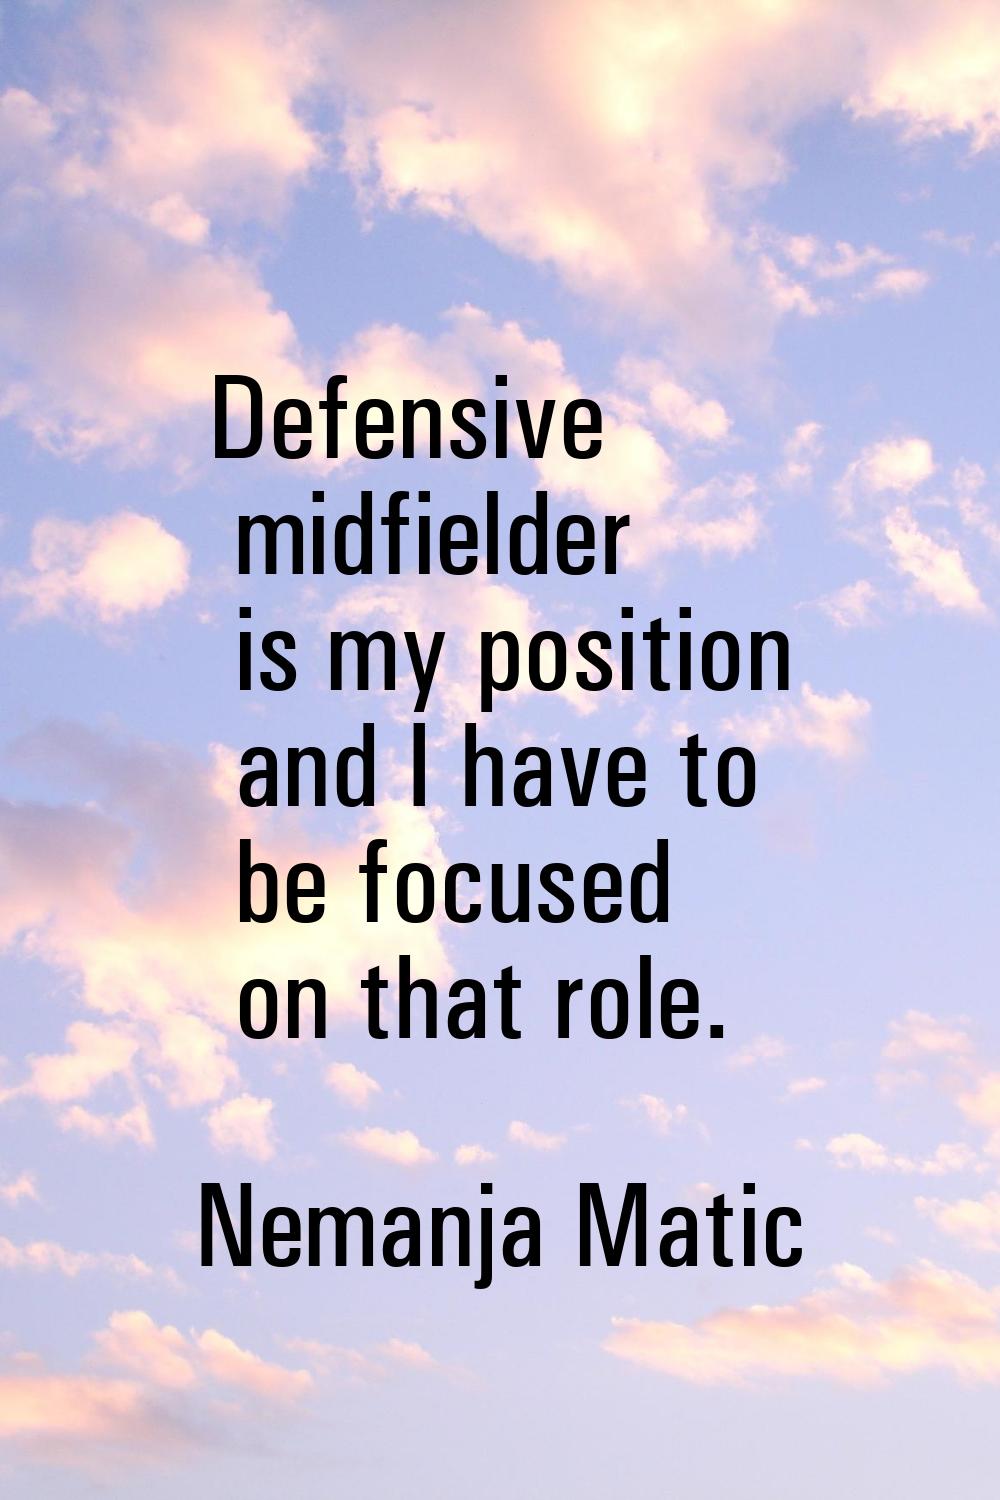 Defensive midfielder is my position and I have to be focused on that role.